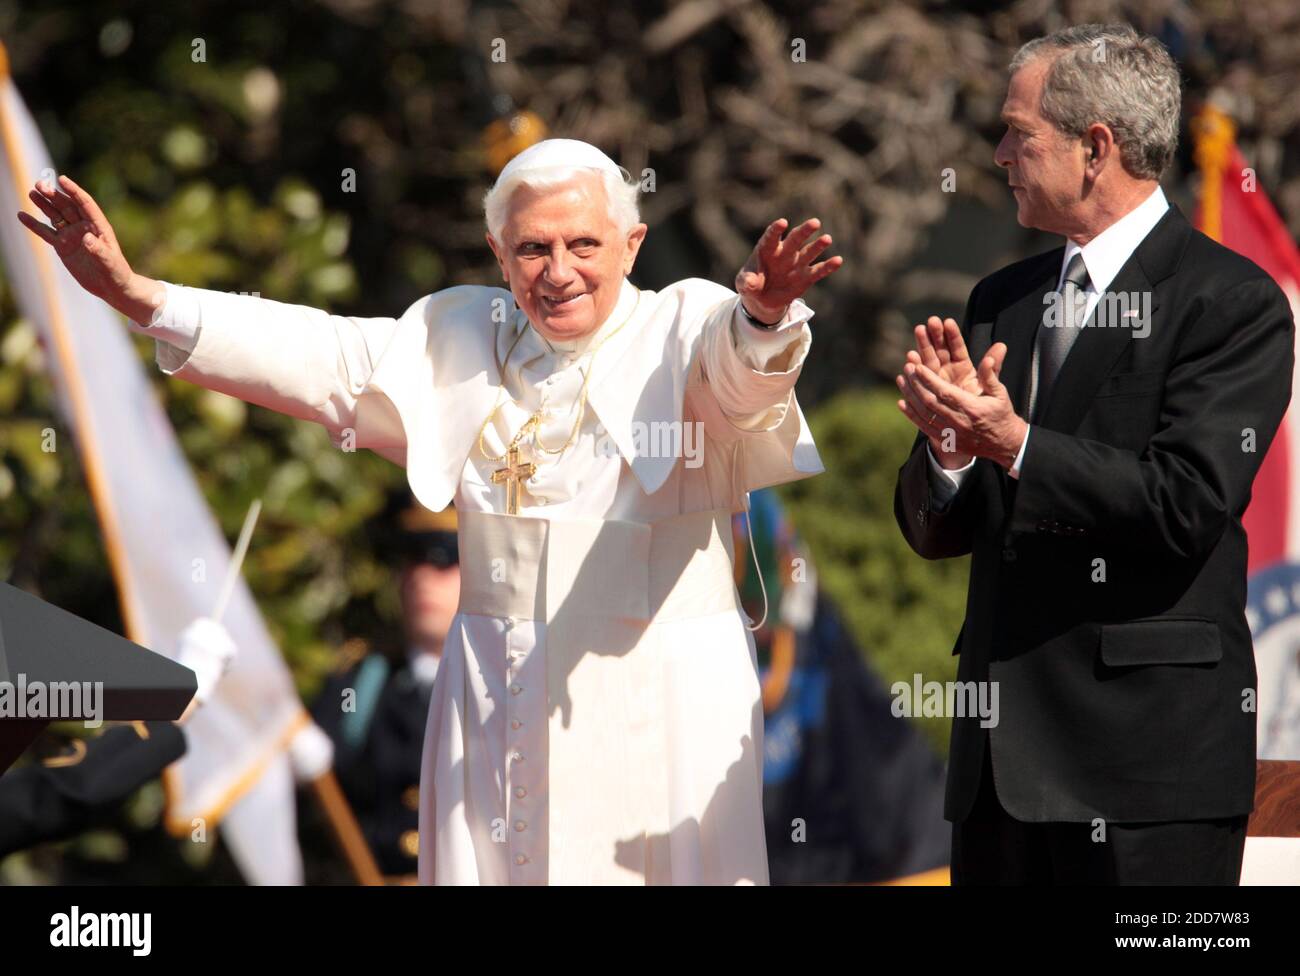 NO FILM, NO VIDEO, NO TV, NO DOCUMENTARY - Pope Benedict XVI greets the crowd, with U.S. President George W. Bush at his side, during a welcoming ceremony on the South Lawn of the White House in Washington, DC, USA, on April 16, 2008. Photo by George Bridges/MCT/ABACAPRESS.COM Stock Photo